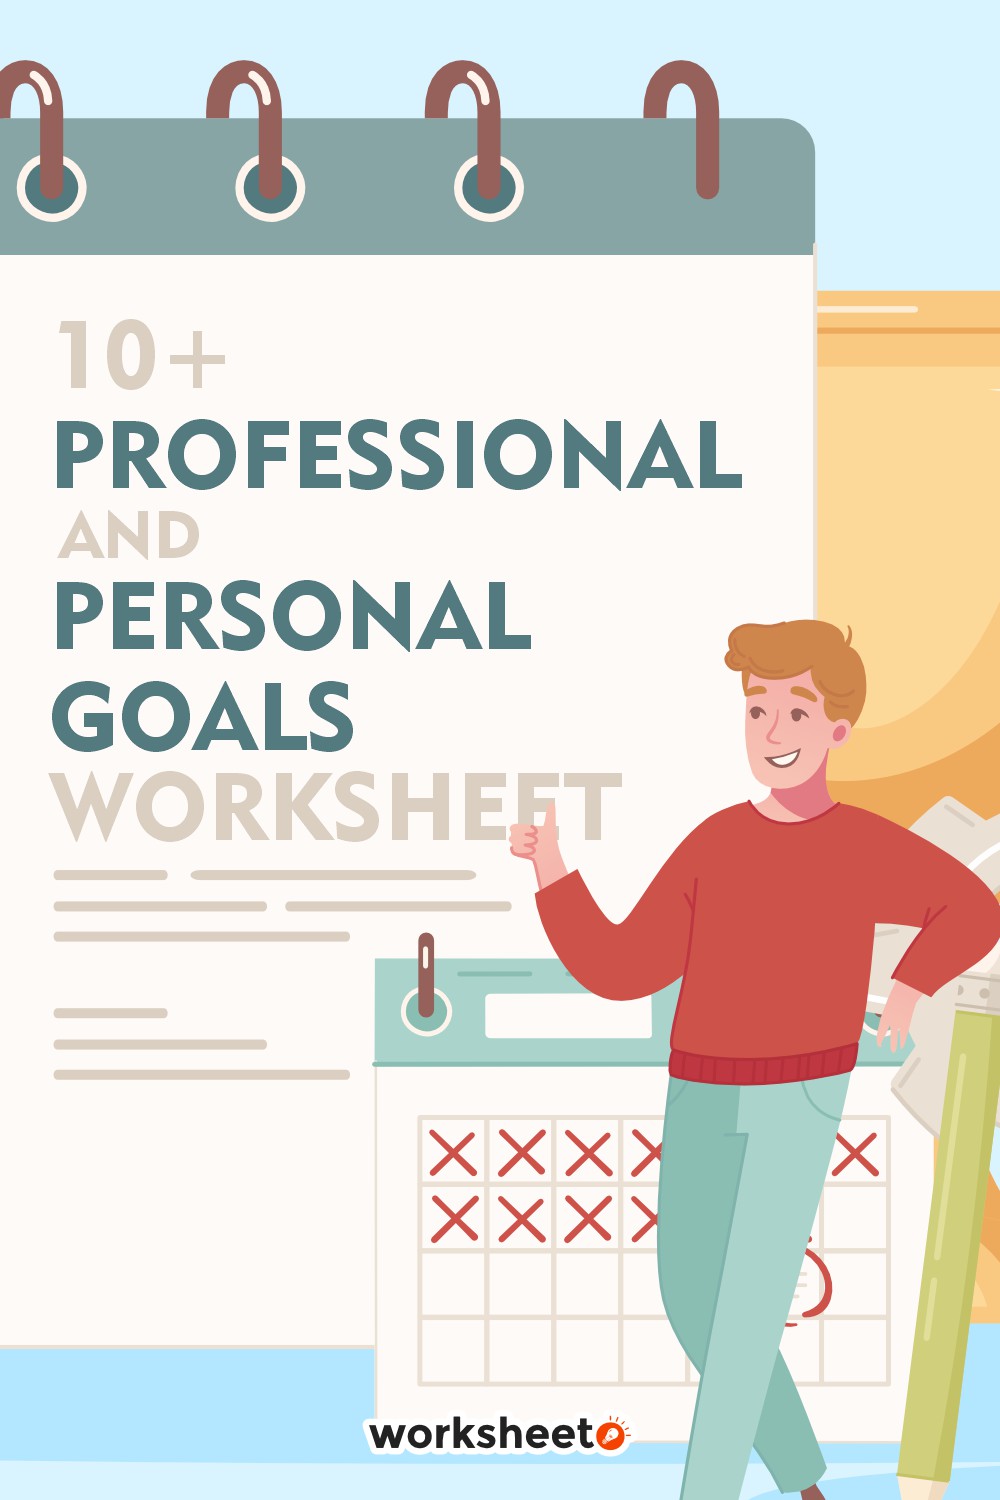 18 Images of Professional And Personal Goals Worksheet